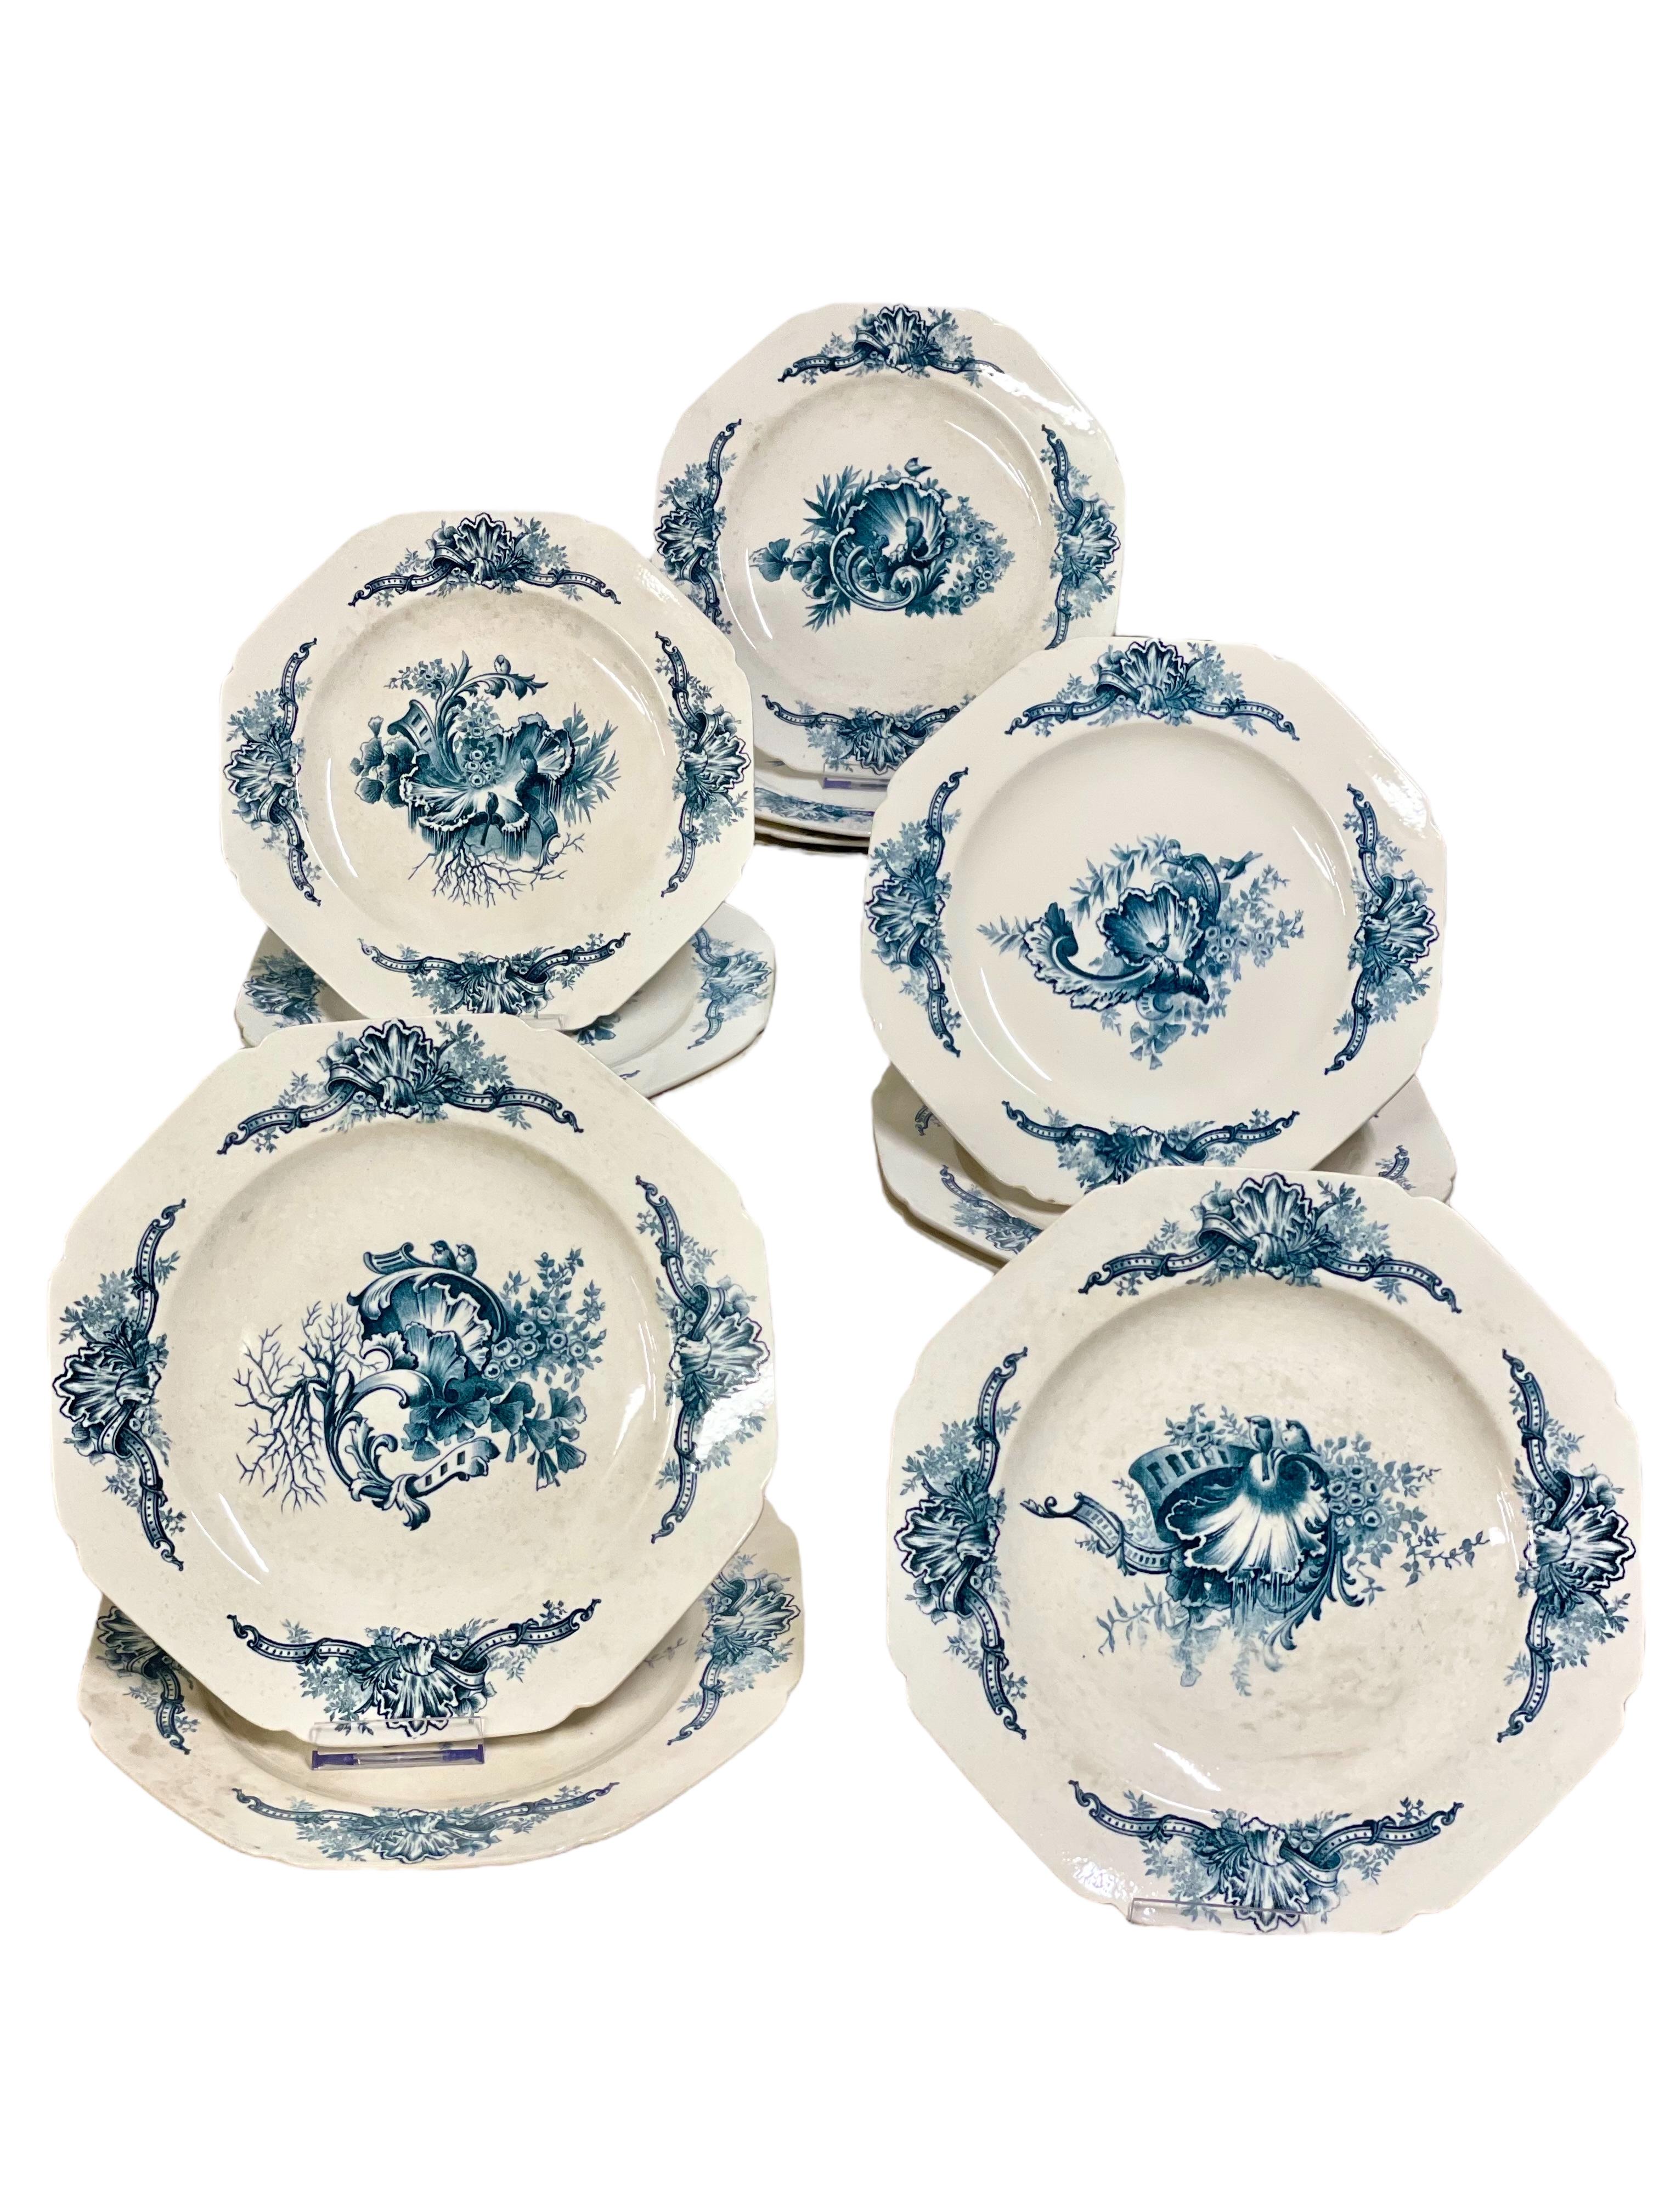 A delightful 33-piece dinner service in traditional blue and white antique French ironstone, made by the famous French faience manufacturer Hautin, Boulenger & Company (HB & Cie) of Choisy le Roi, in the south-eastern suburbs of Paris. Dating from